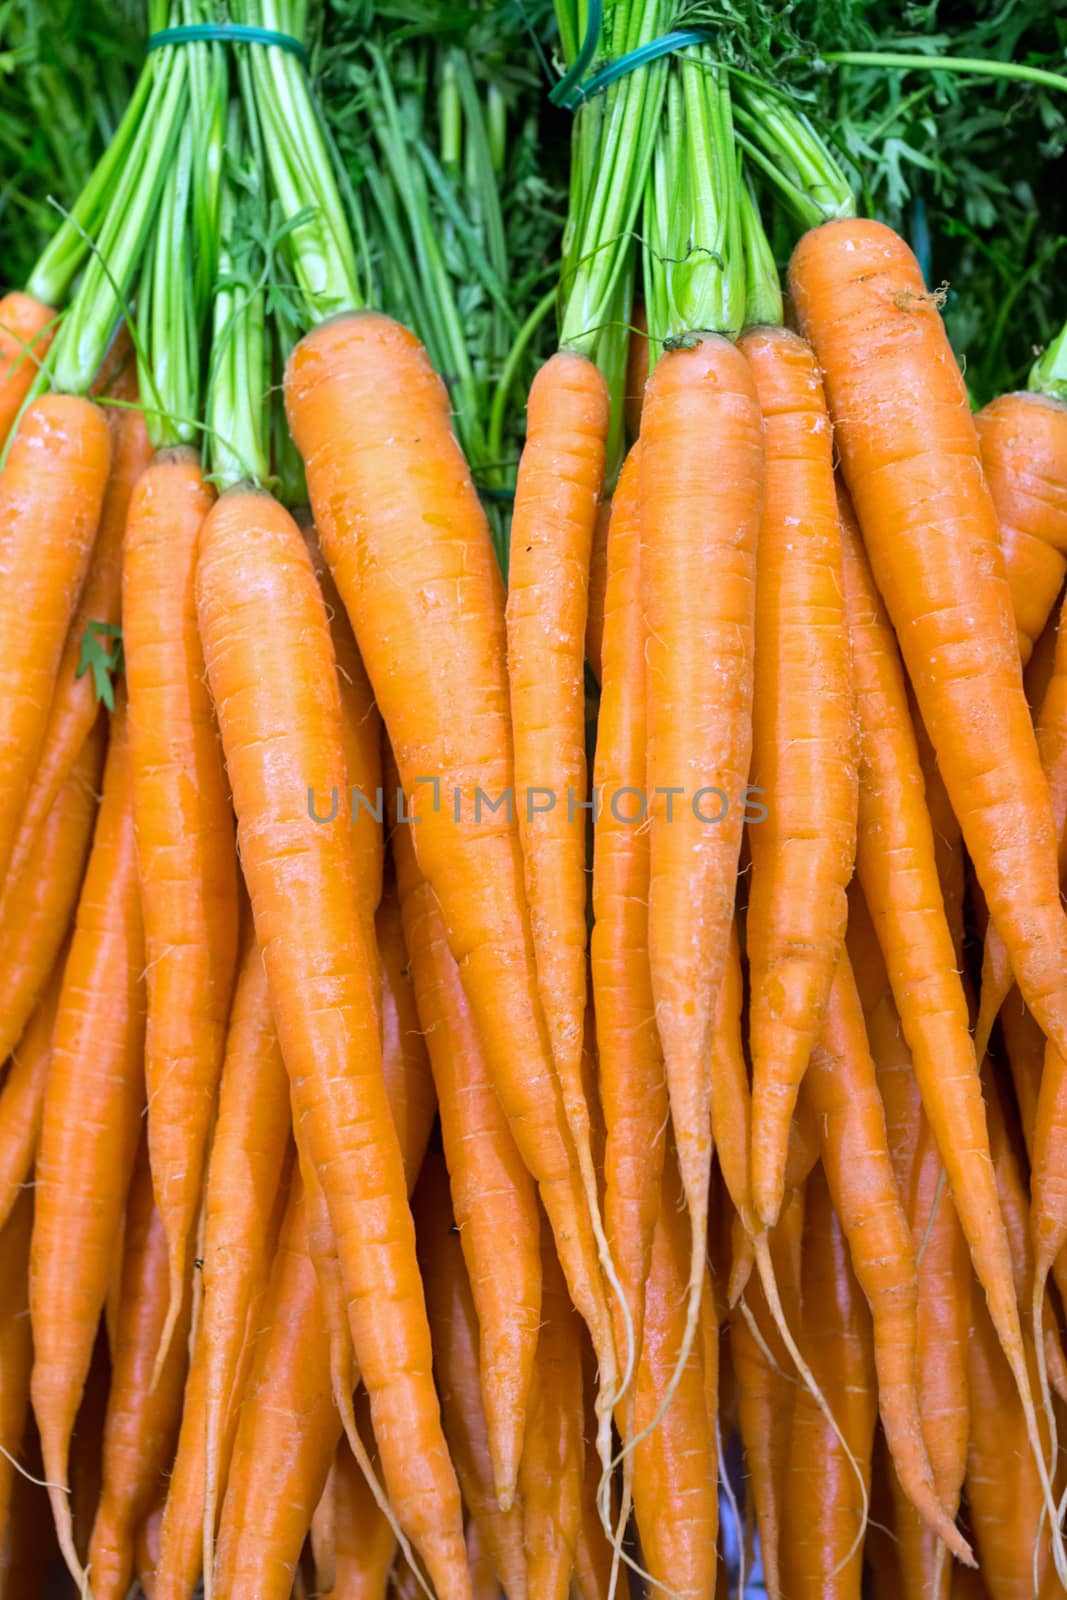 Fresh carrots for sale at the grocery